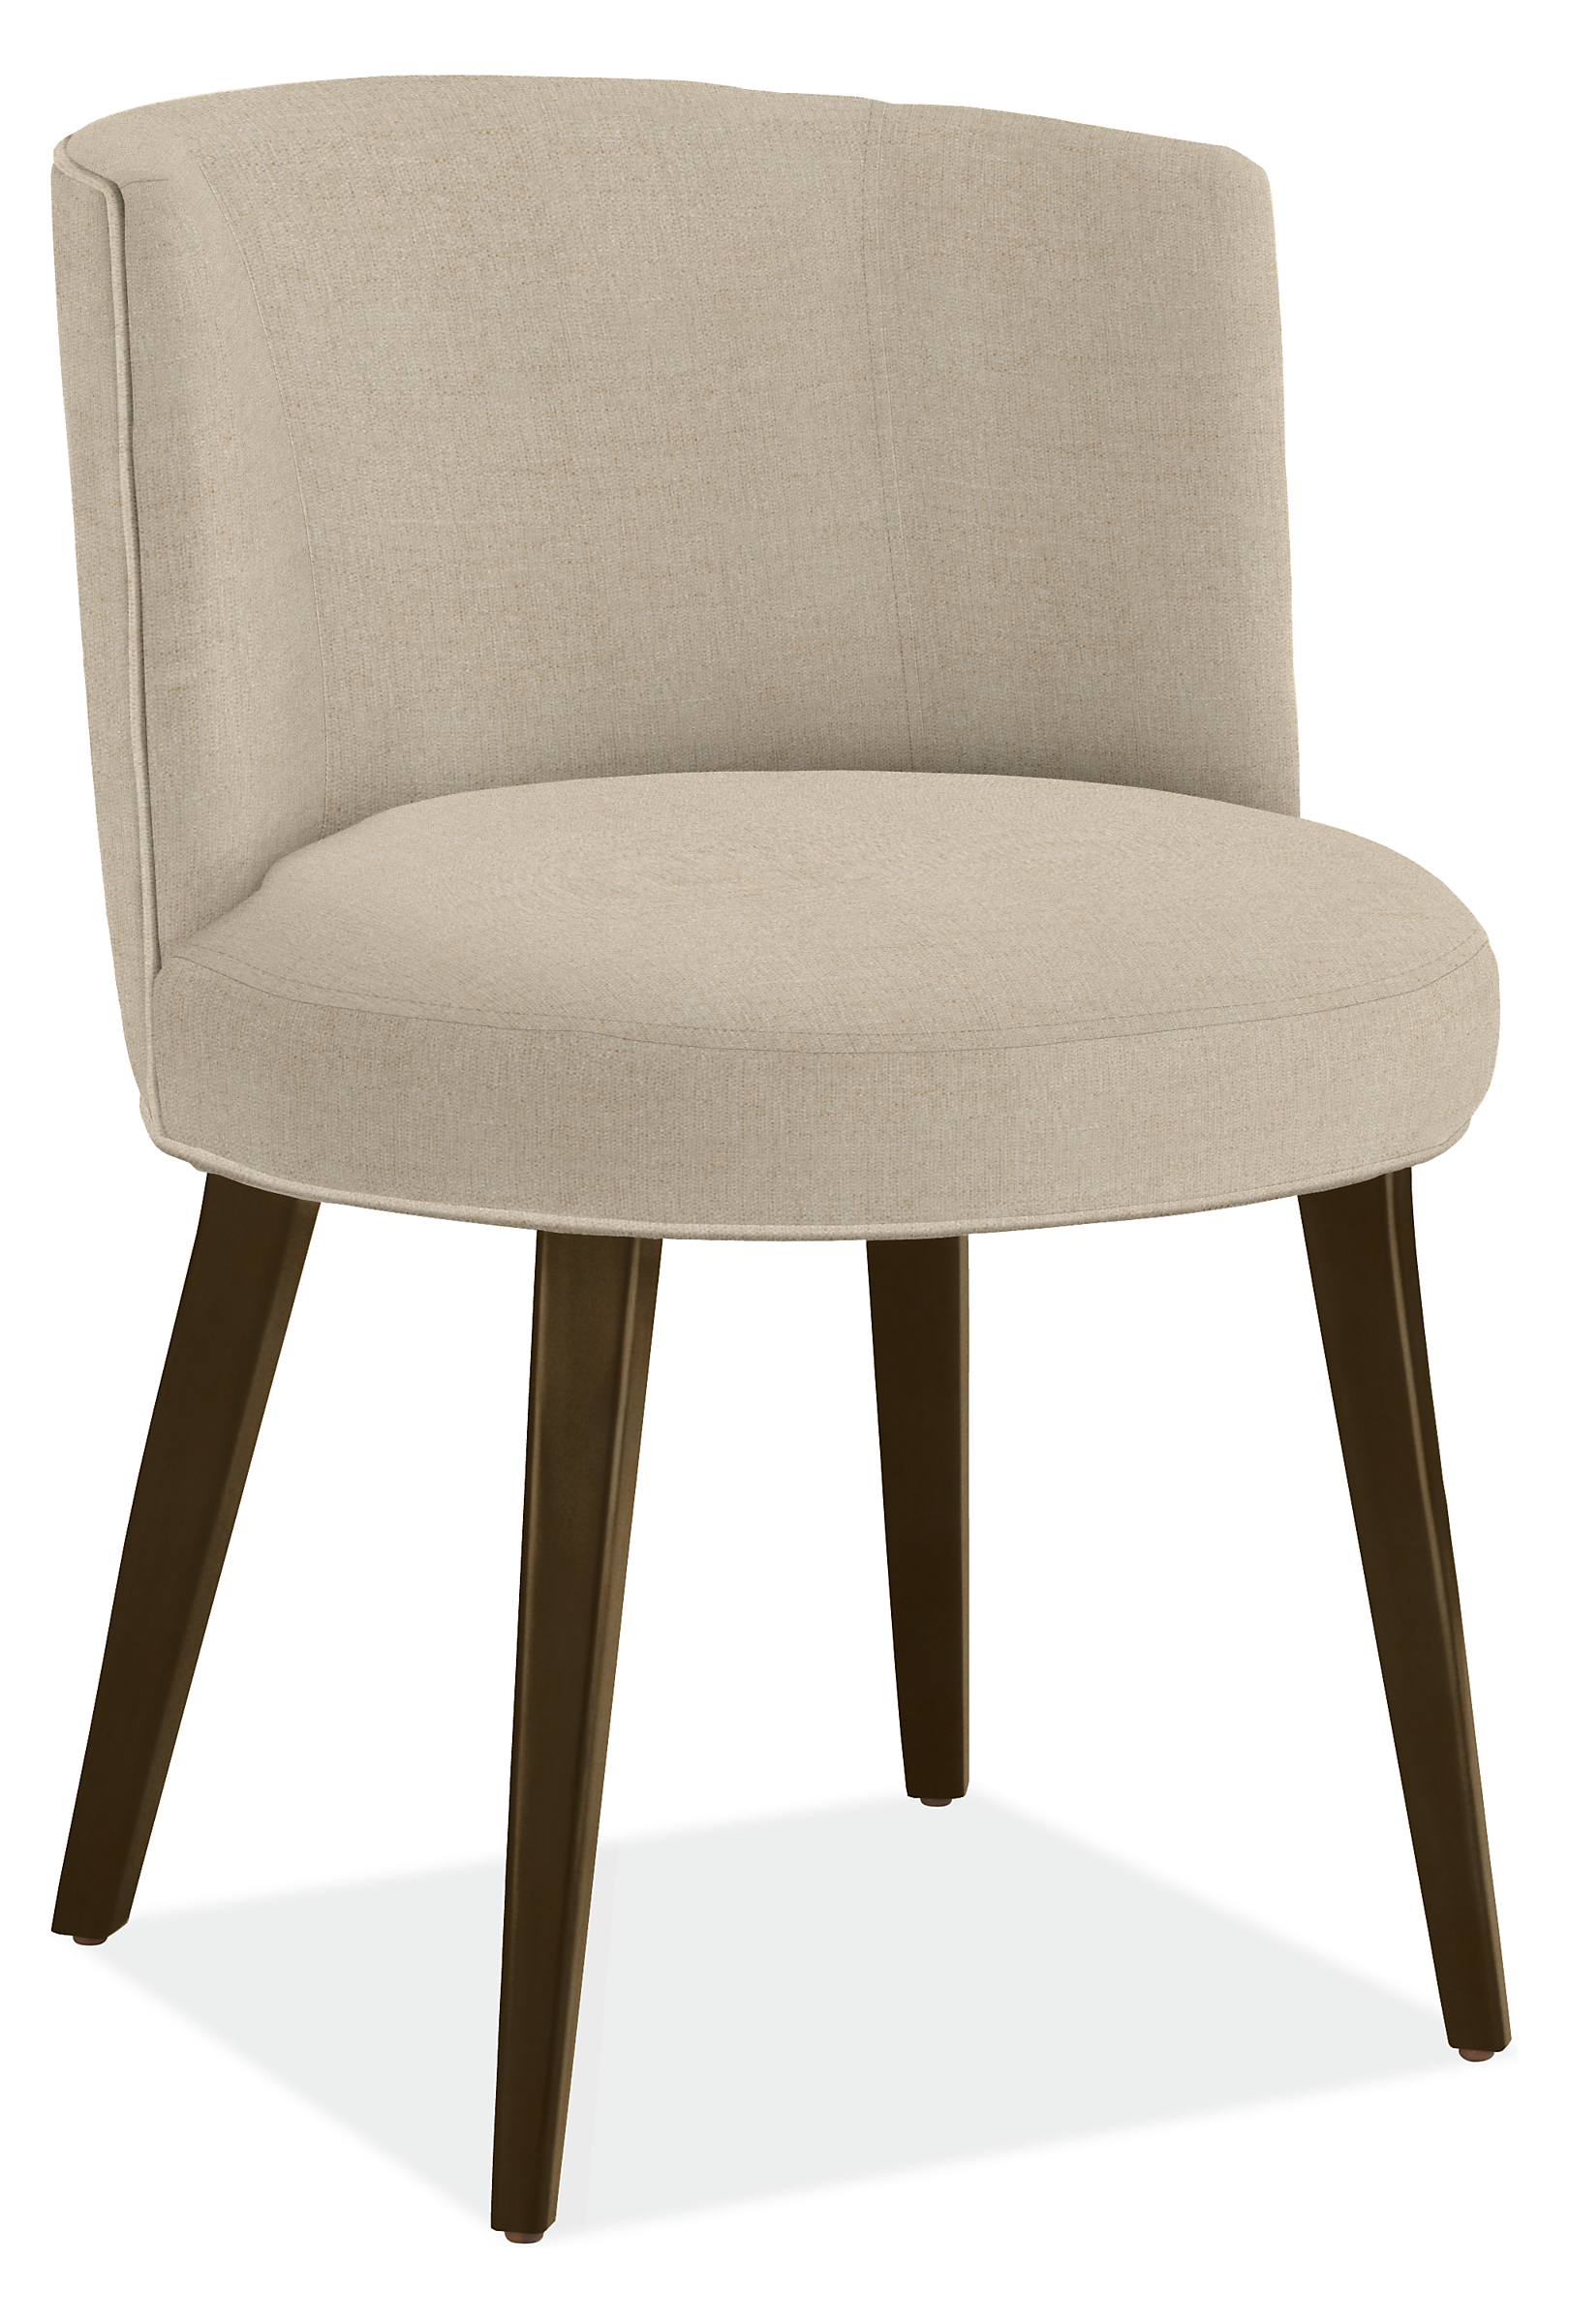 June Side Chair in Hawkins Oatmeal with Charcoal Legs